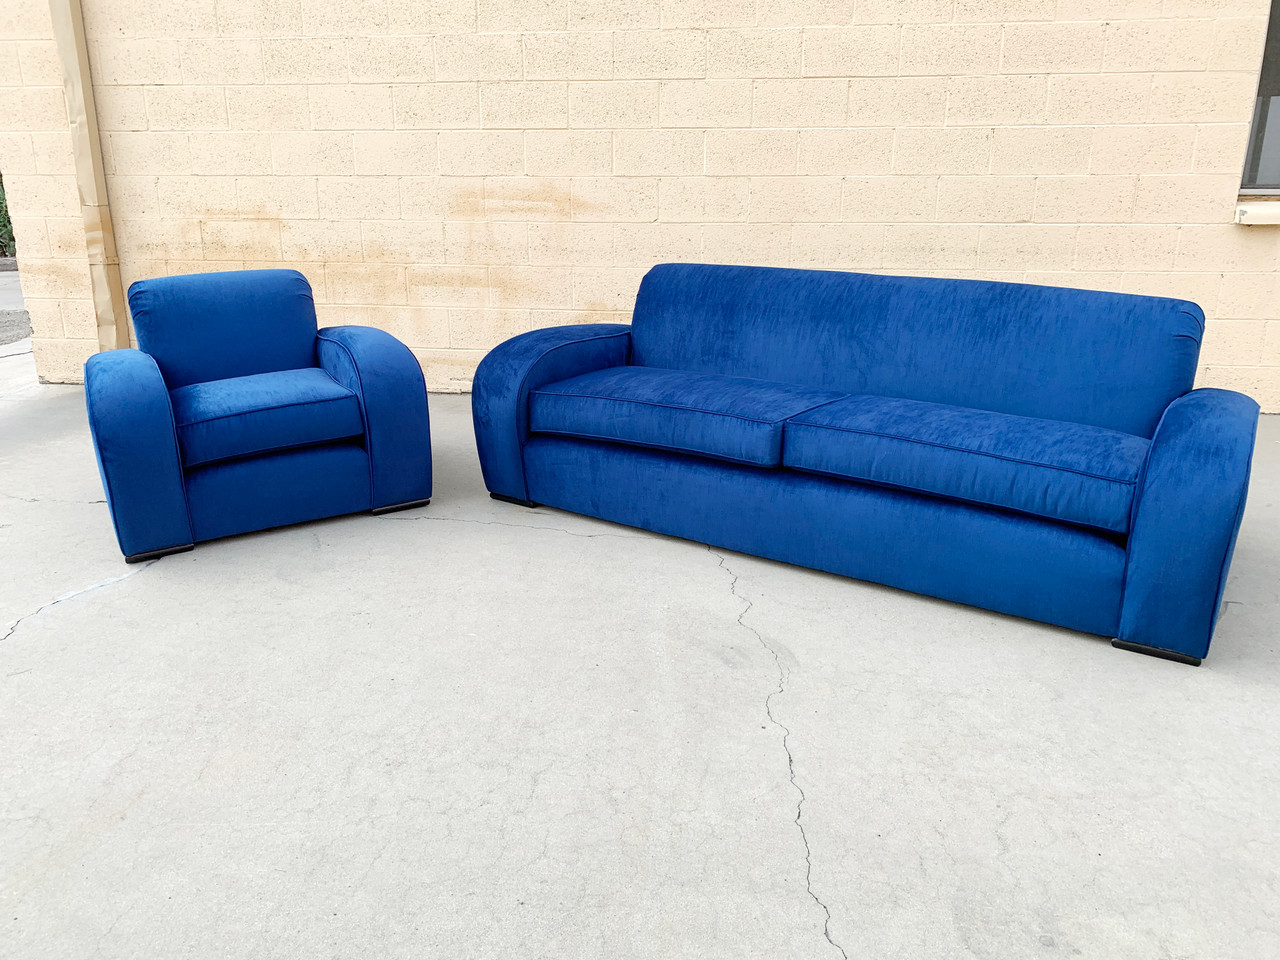 1930's French Art Deco Sofa and Chair Set, Refinished in Blue Velvet -  Rehab Vintage Interiors